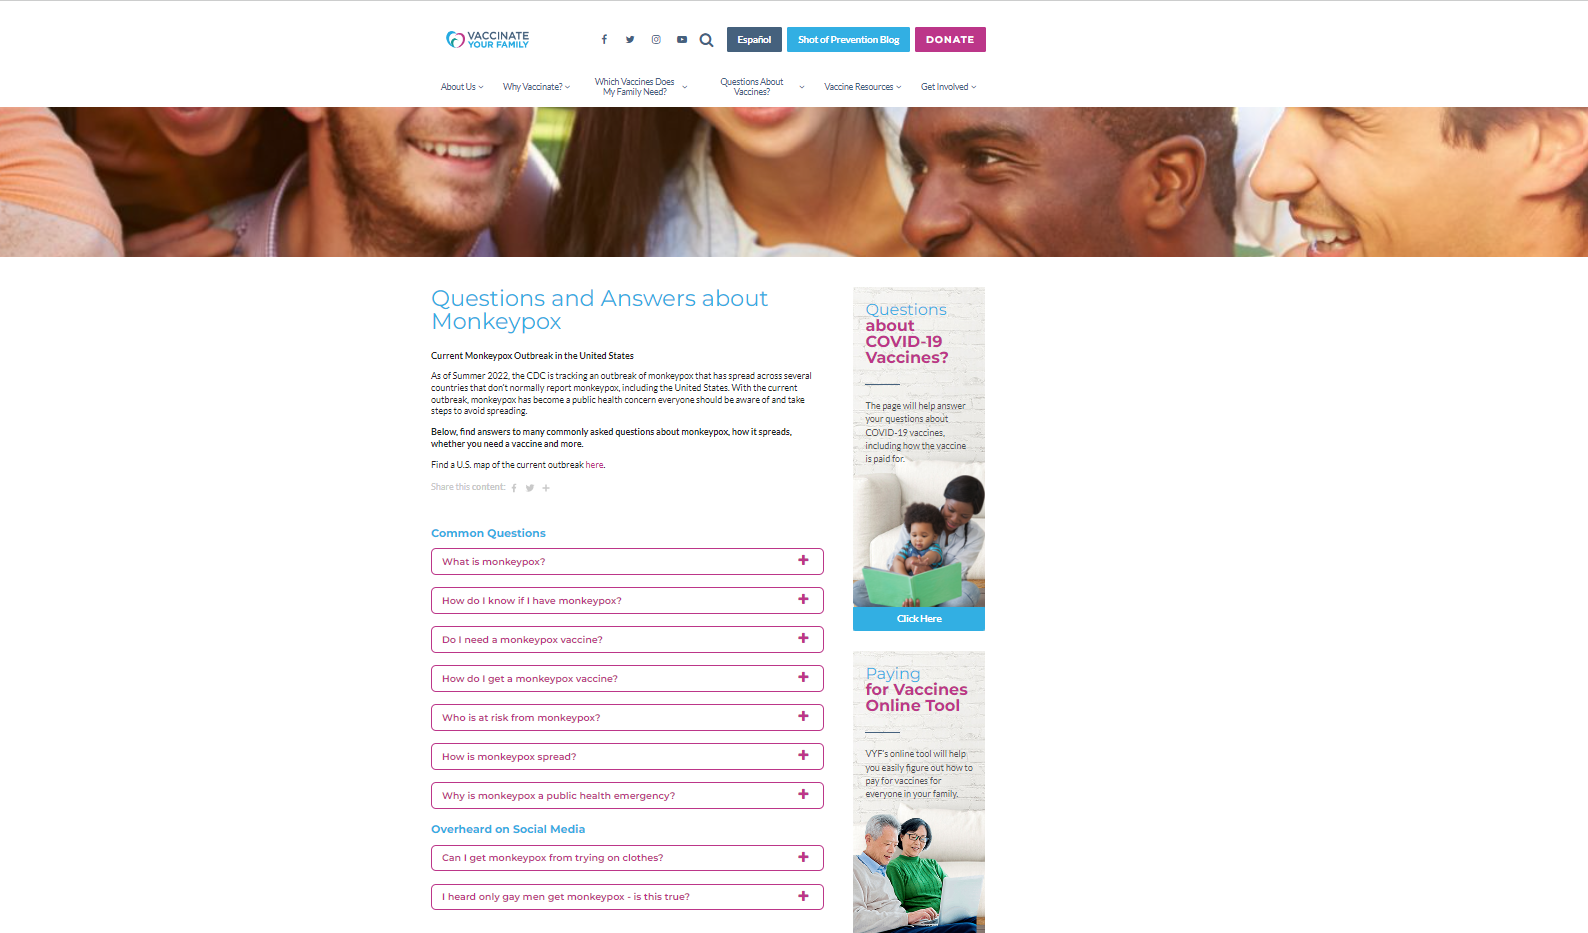 A banner at the top of the page shows a cut-off picture of men and women of different races smiling. Below the banner are several drop down question and answers